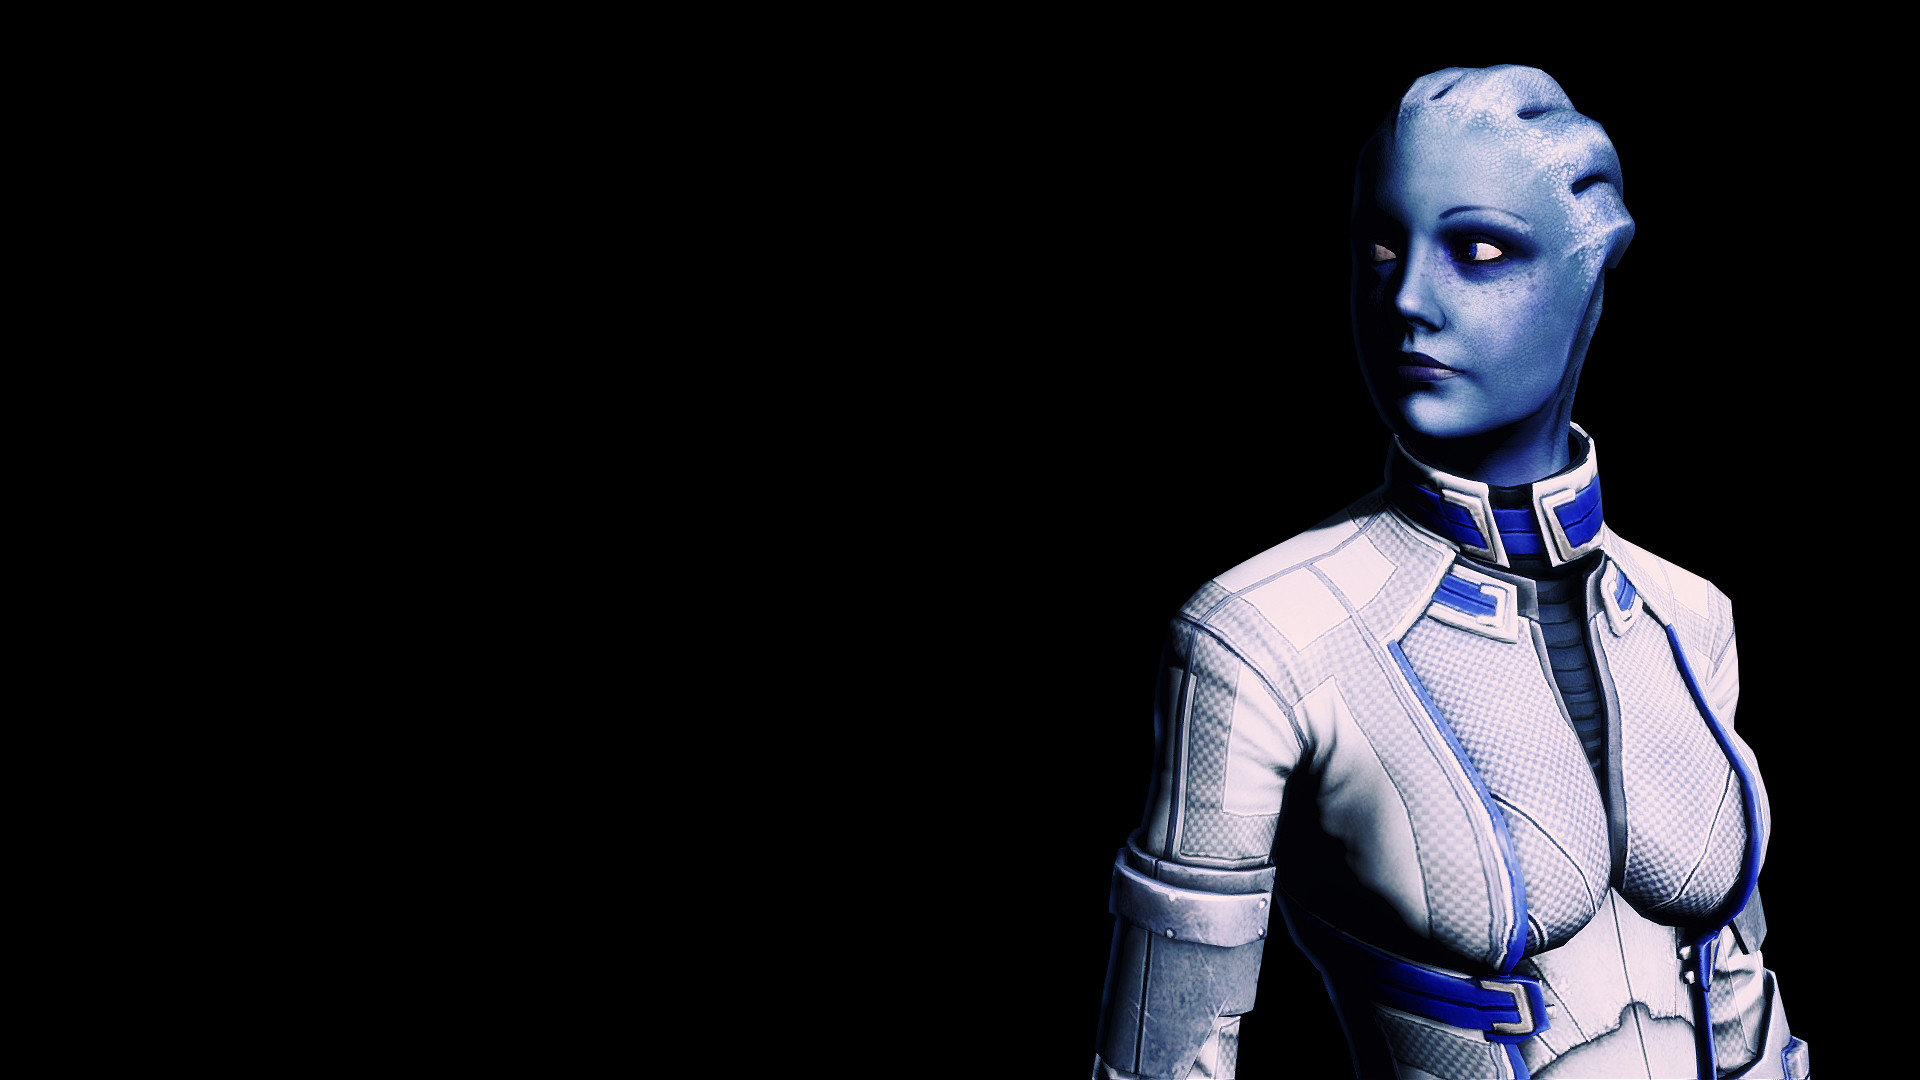 1920x1080 Liara T'soni Wallpaper (Normandy / extended cut) by Strayker on . ...